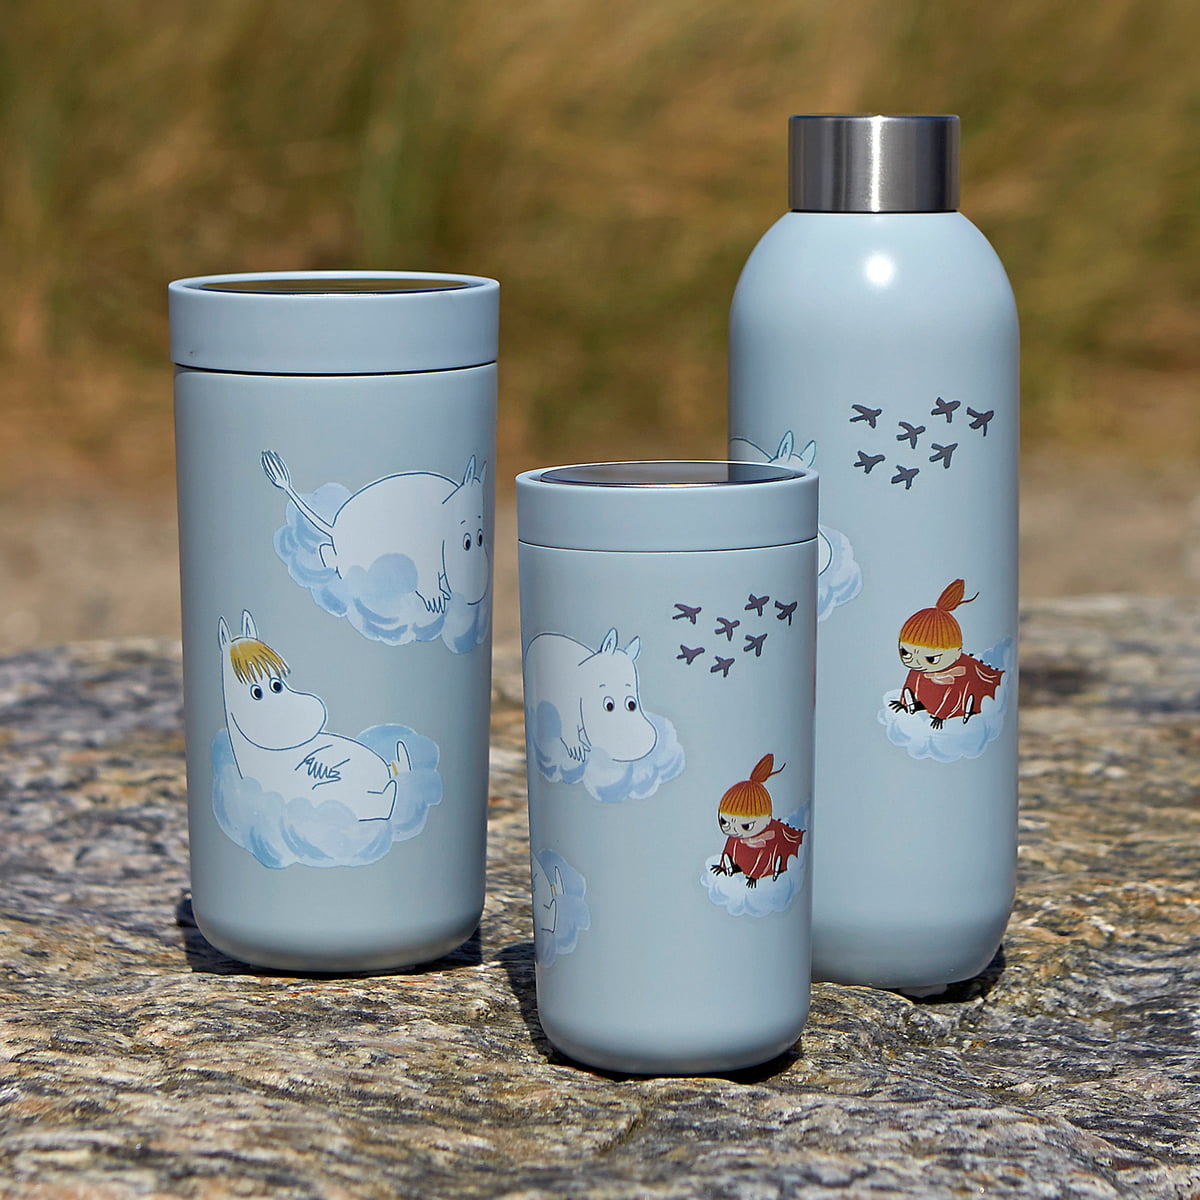 https://cdn.connox.com/m/100035/269041/media/stelton/To-Go-Click/Stelton-Keep-Cool-To-Go-Click-Moomin-soft-cloud-Situation-2.jpg